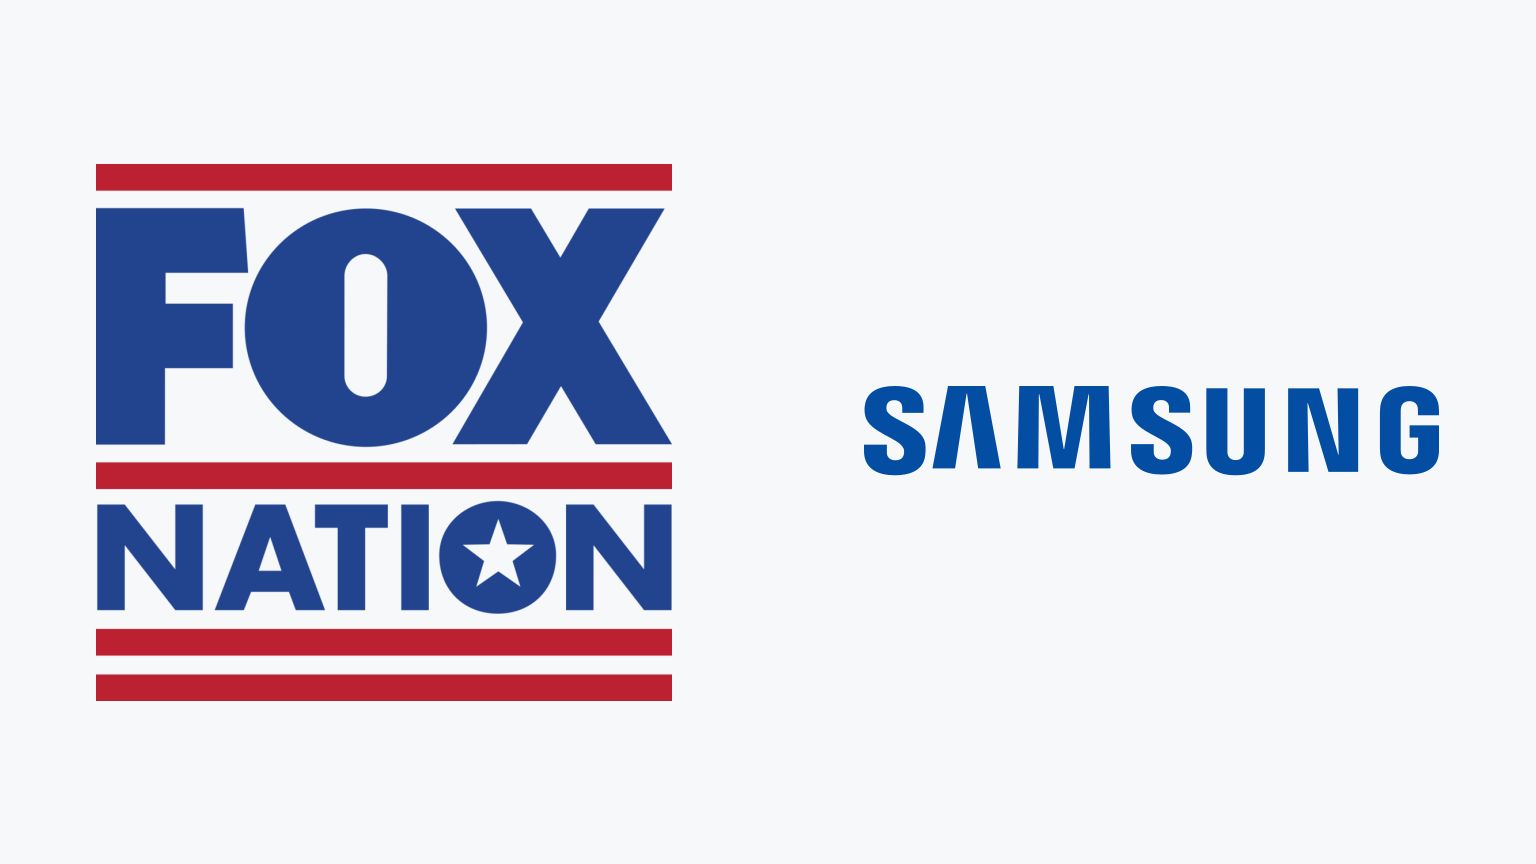 How To Download Fox Nation On Samsung Smart TV